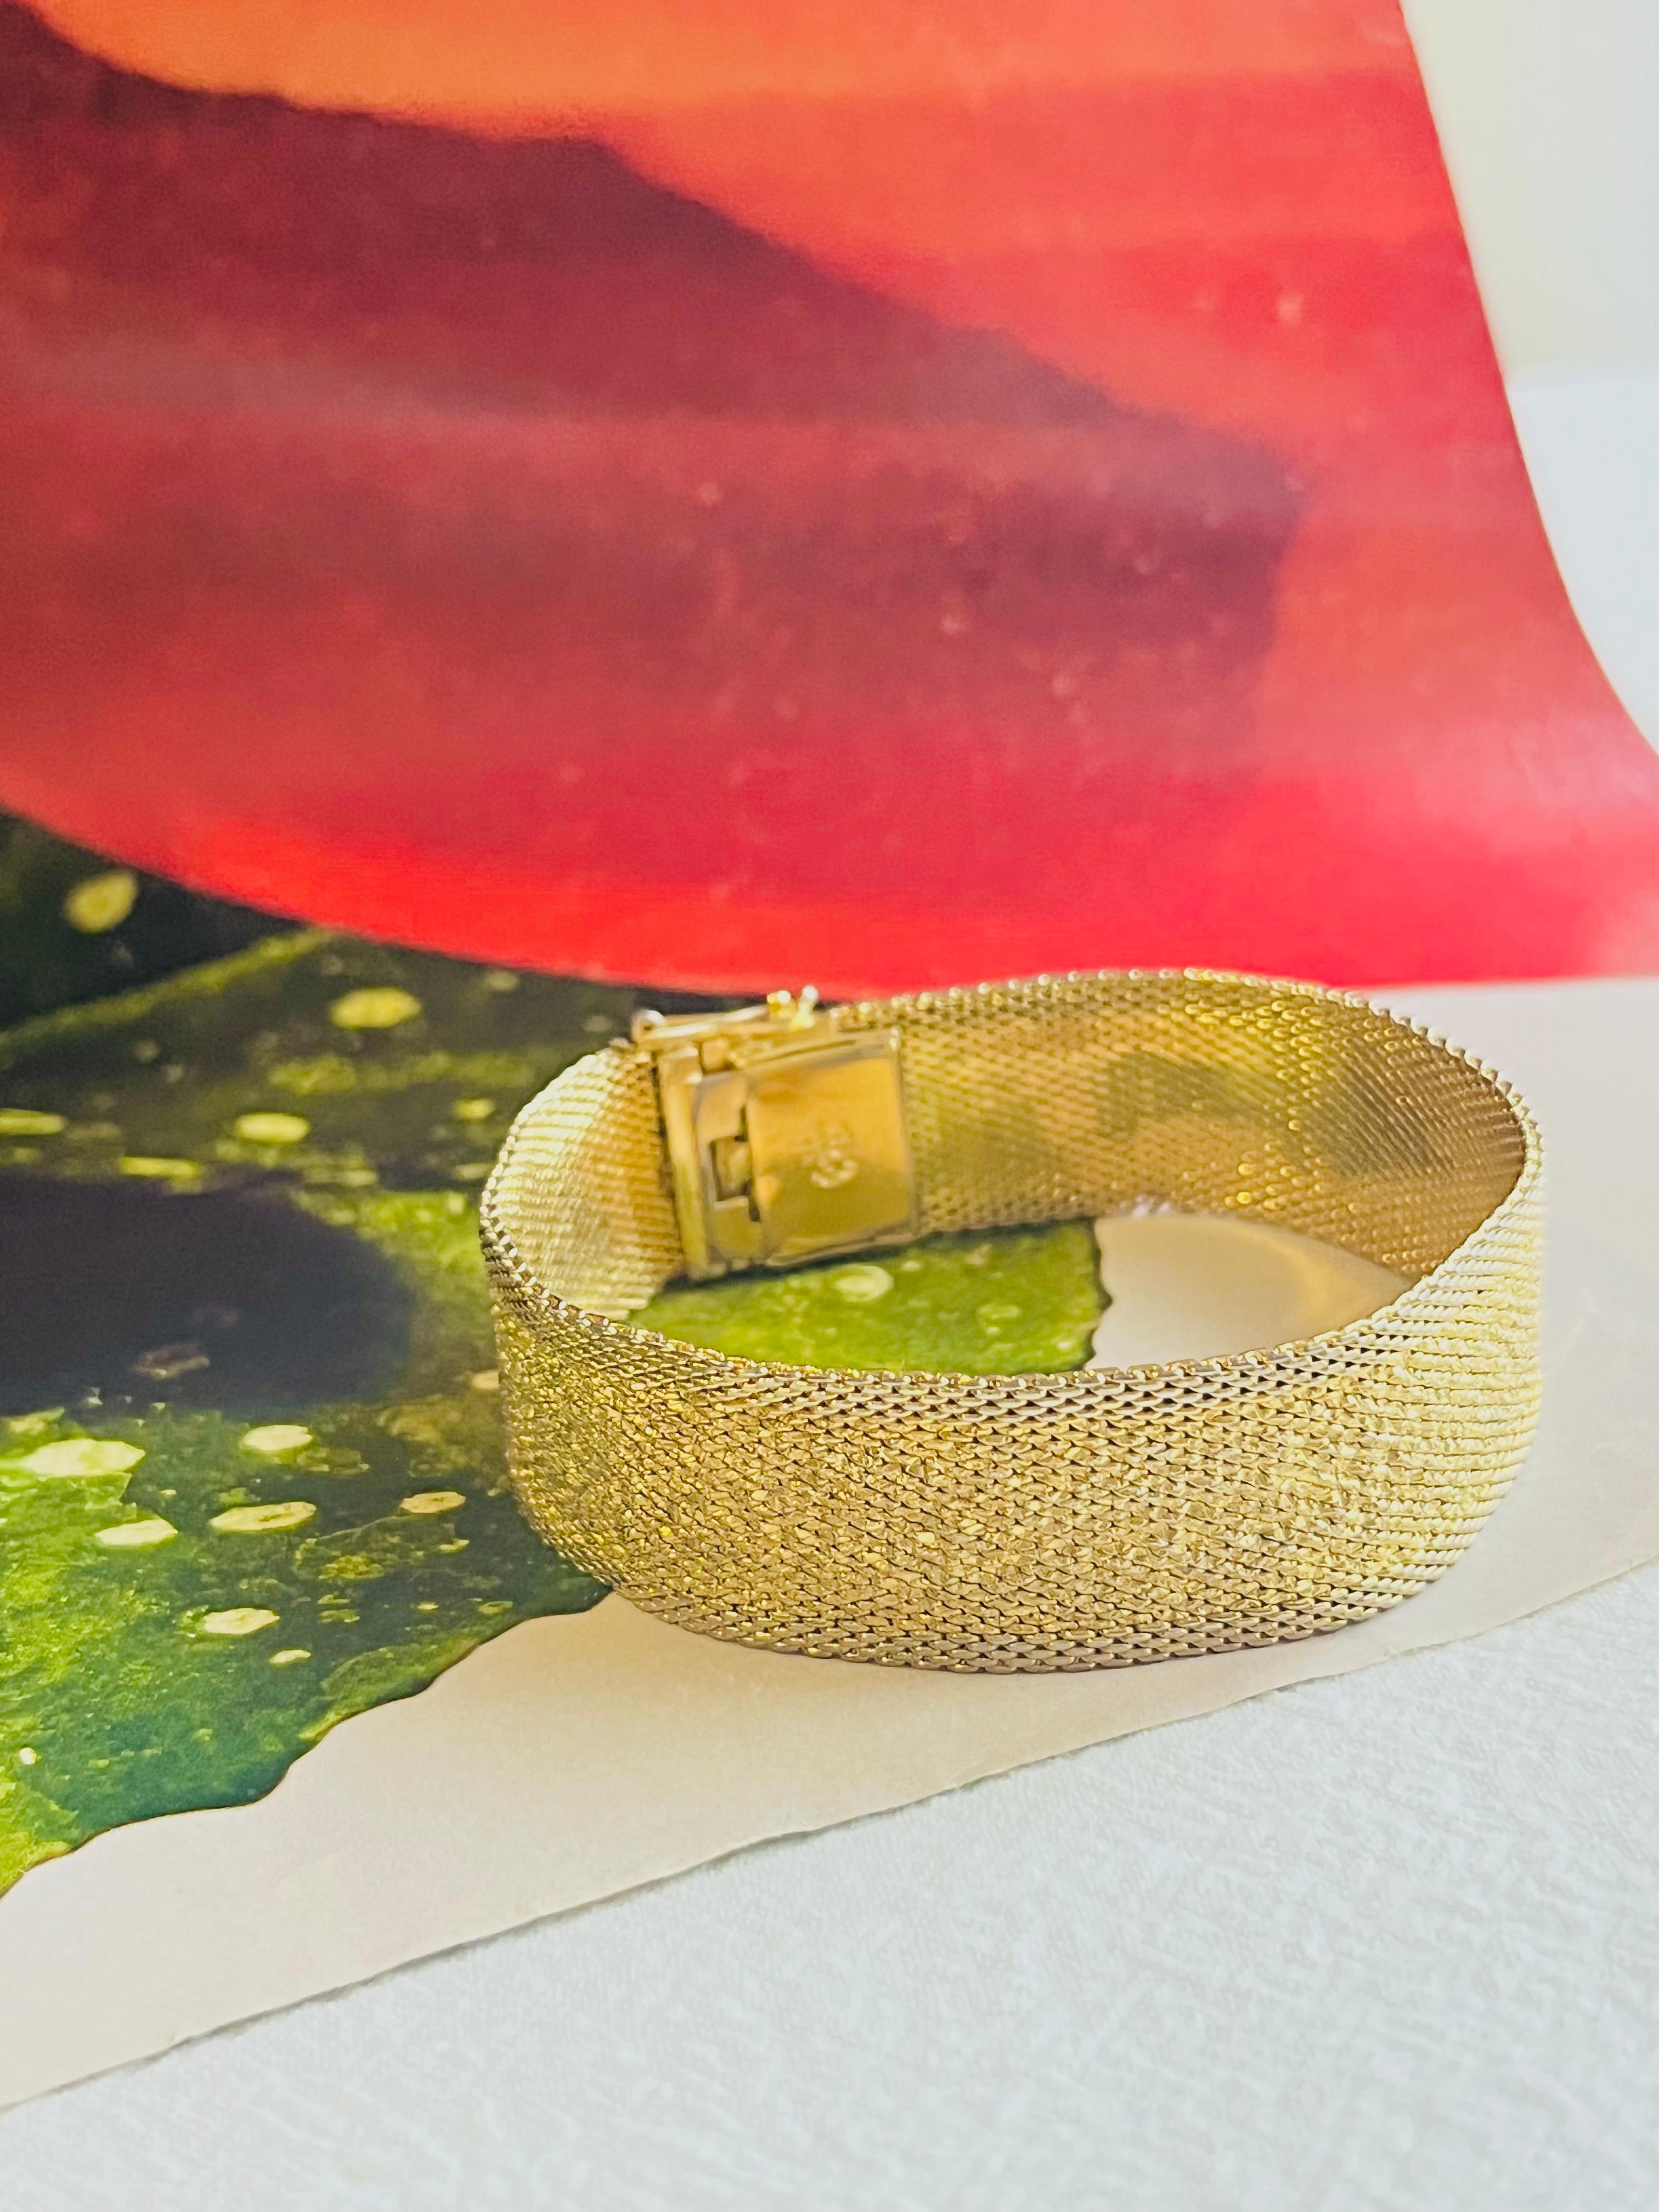 Christian Dior GROSSE 1966 Ridged Link Mesh Weave Modernist Cuff Bracelet, Gold Tone

A very beautiful bracelet by GROSSE, signed at the back.

Very good condition. Some light scratches or colour loss. Barely noticeable. 100% Genuine.

Size: 19.0